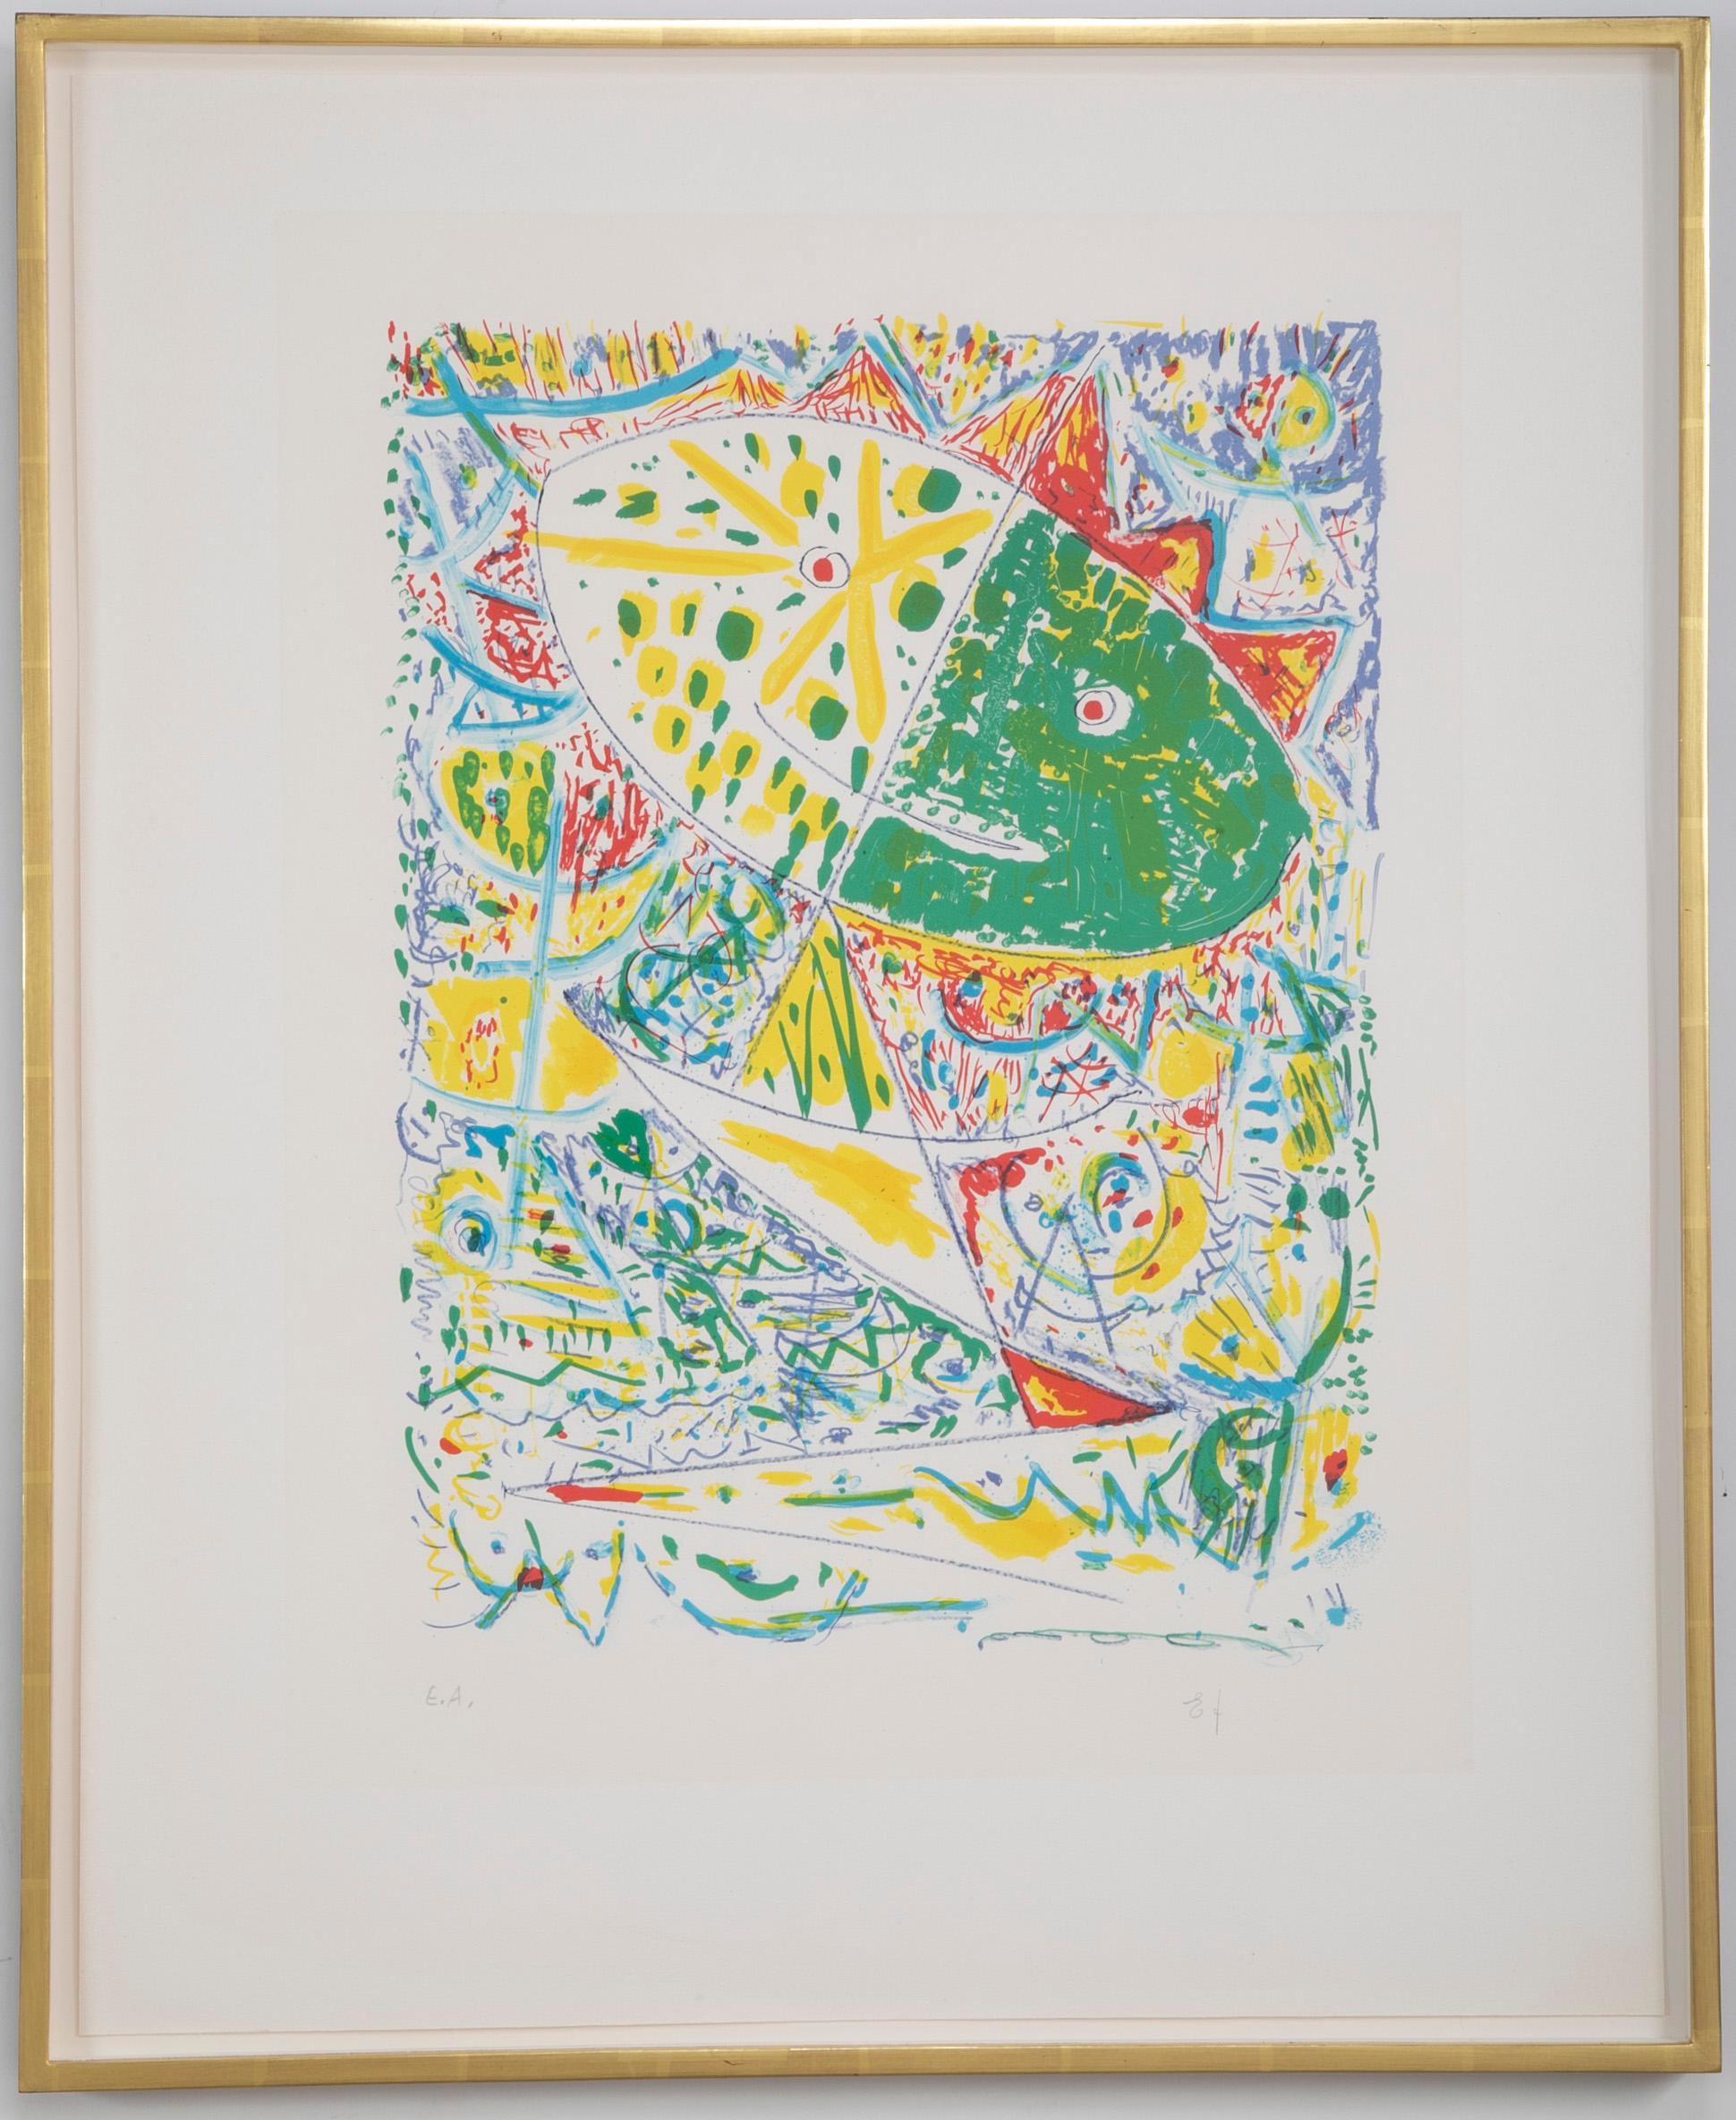 Lithograph in colors composition by Egill Jacobsen (Danish. 1918-1998). Signed EJ, EA. Framed using acid free materials, UV protective plexiglass in 22-karat yellow gold leaf frames.

Measures: Sight: 29.88